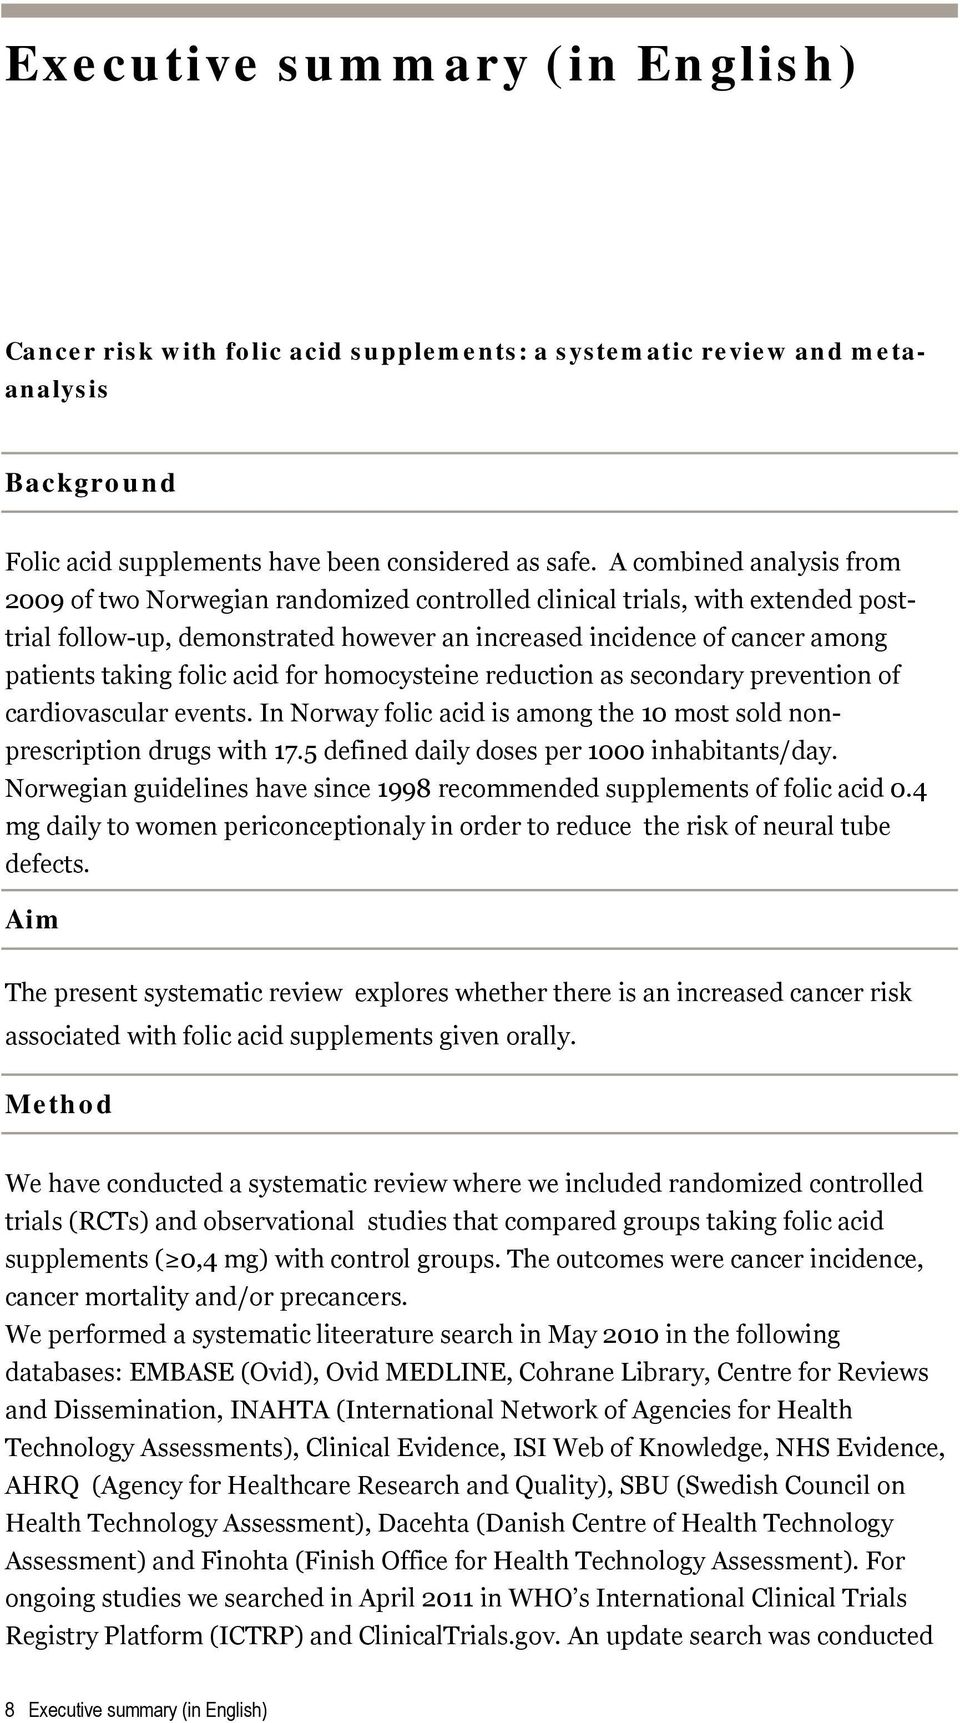 folic acid for homocysteine reduction as secondary prevention of cardiovascular events. In Norway folic acid is among the 10 most sold nonprescription drugs with 17.